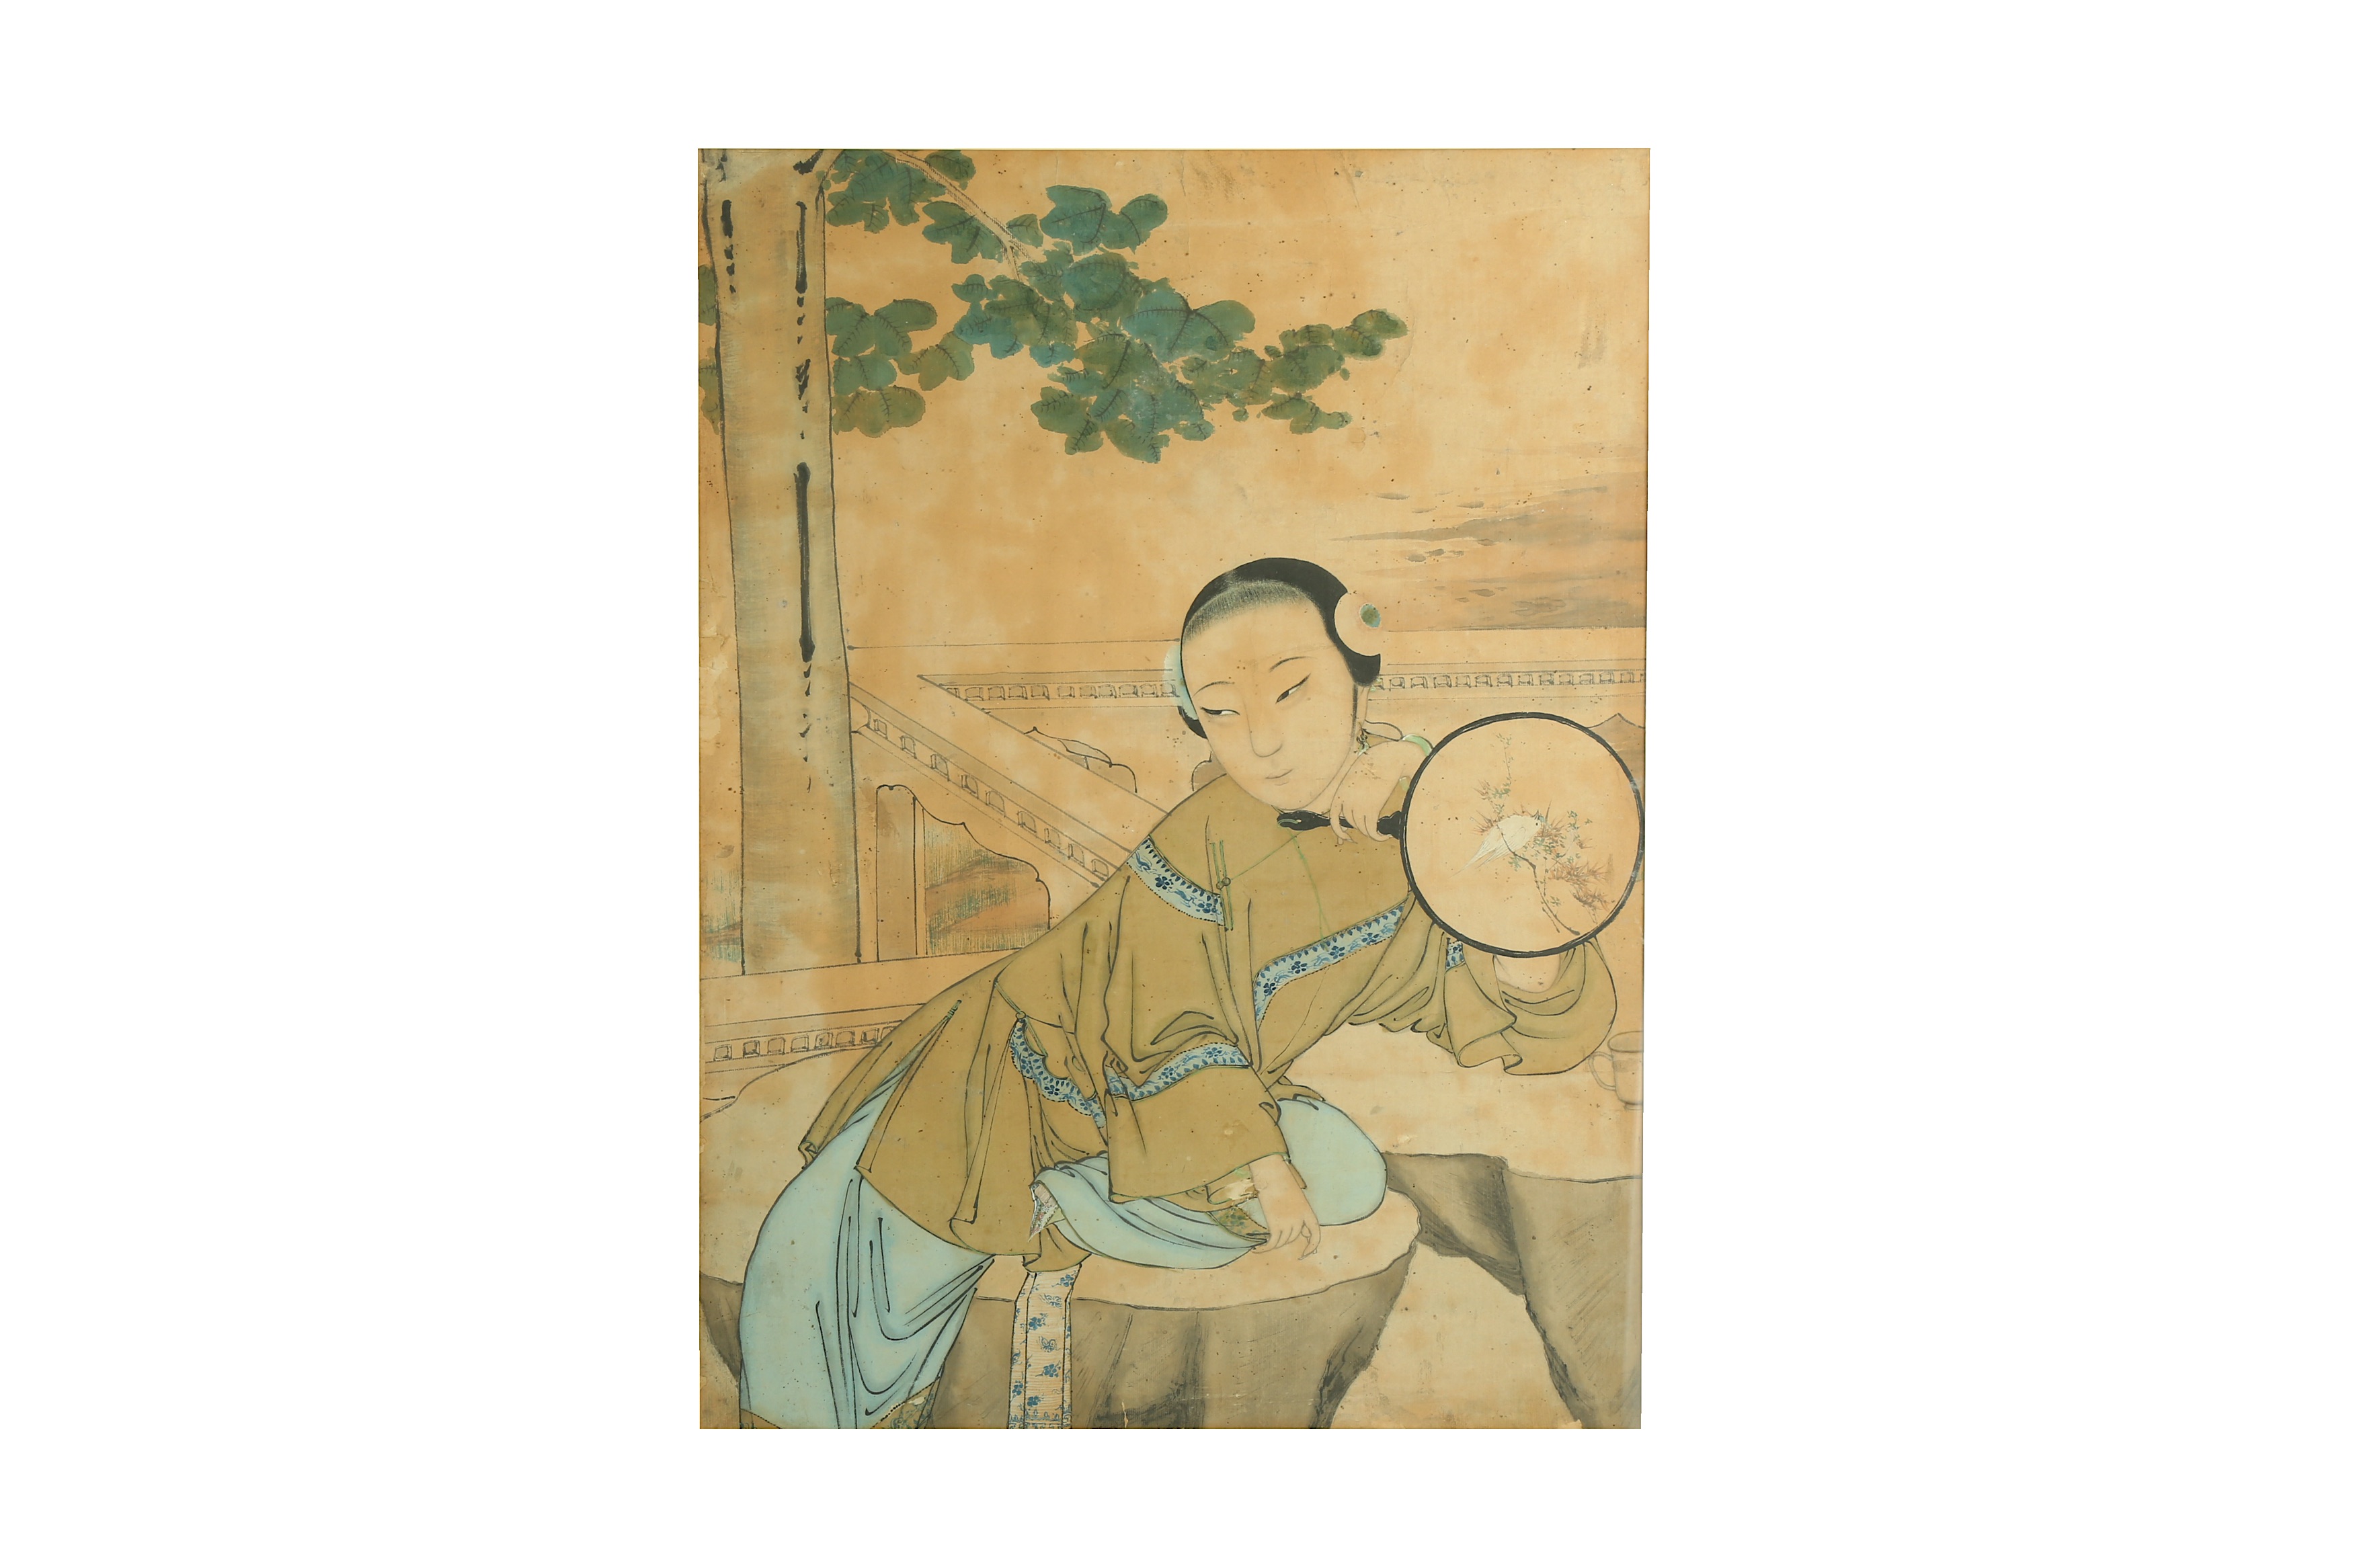 A CHINESE PAINTING OF A YOUNG WOMAN.